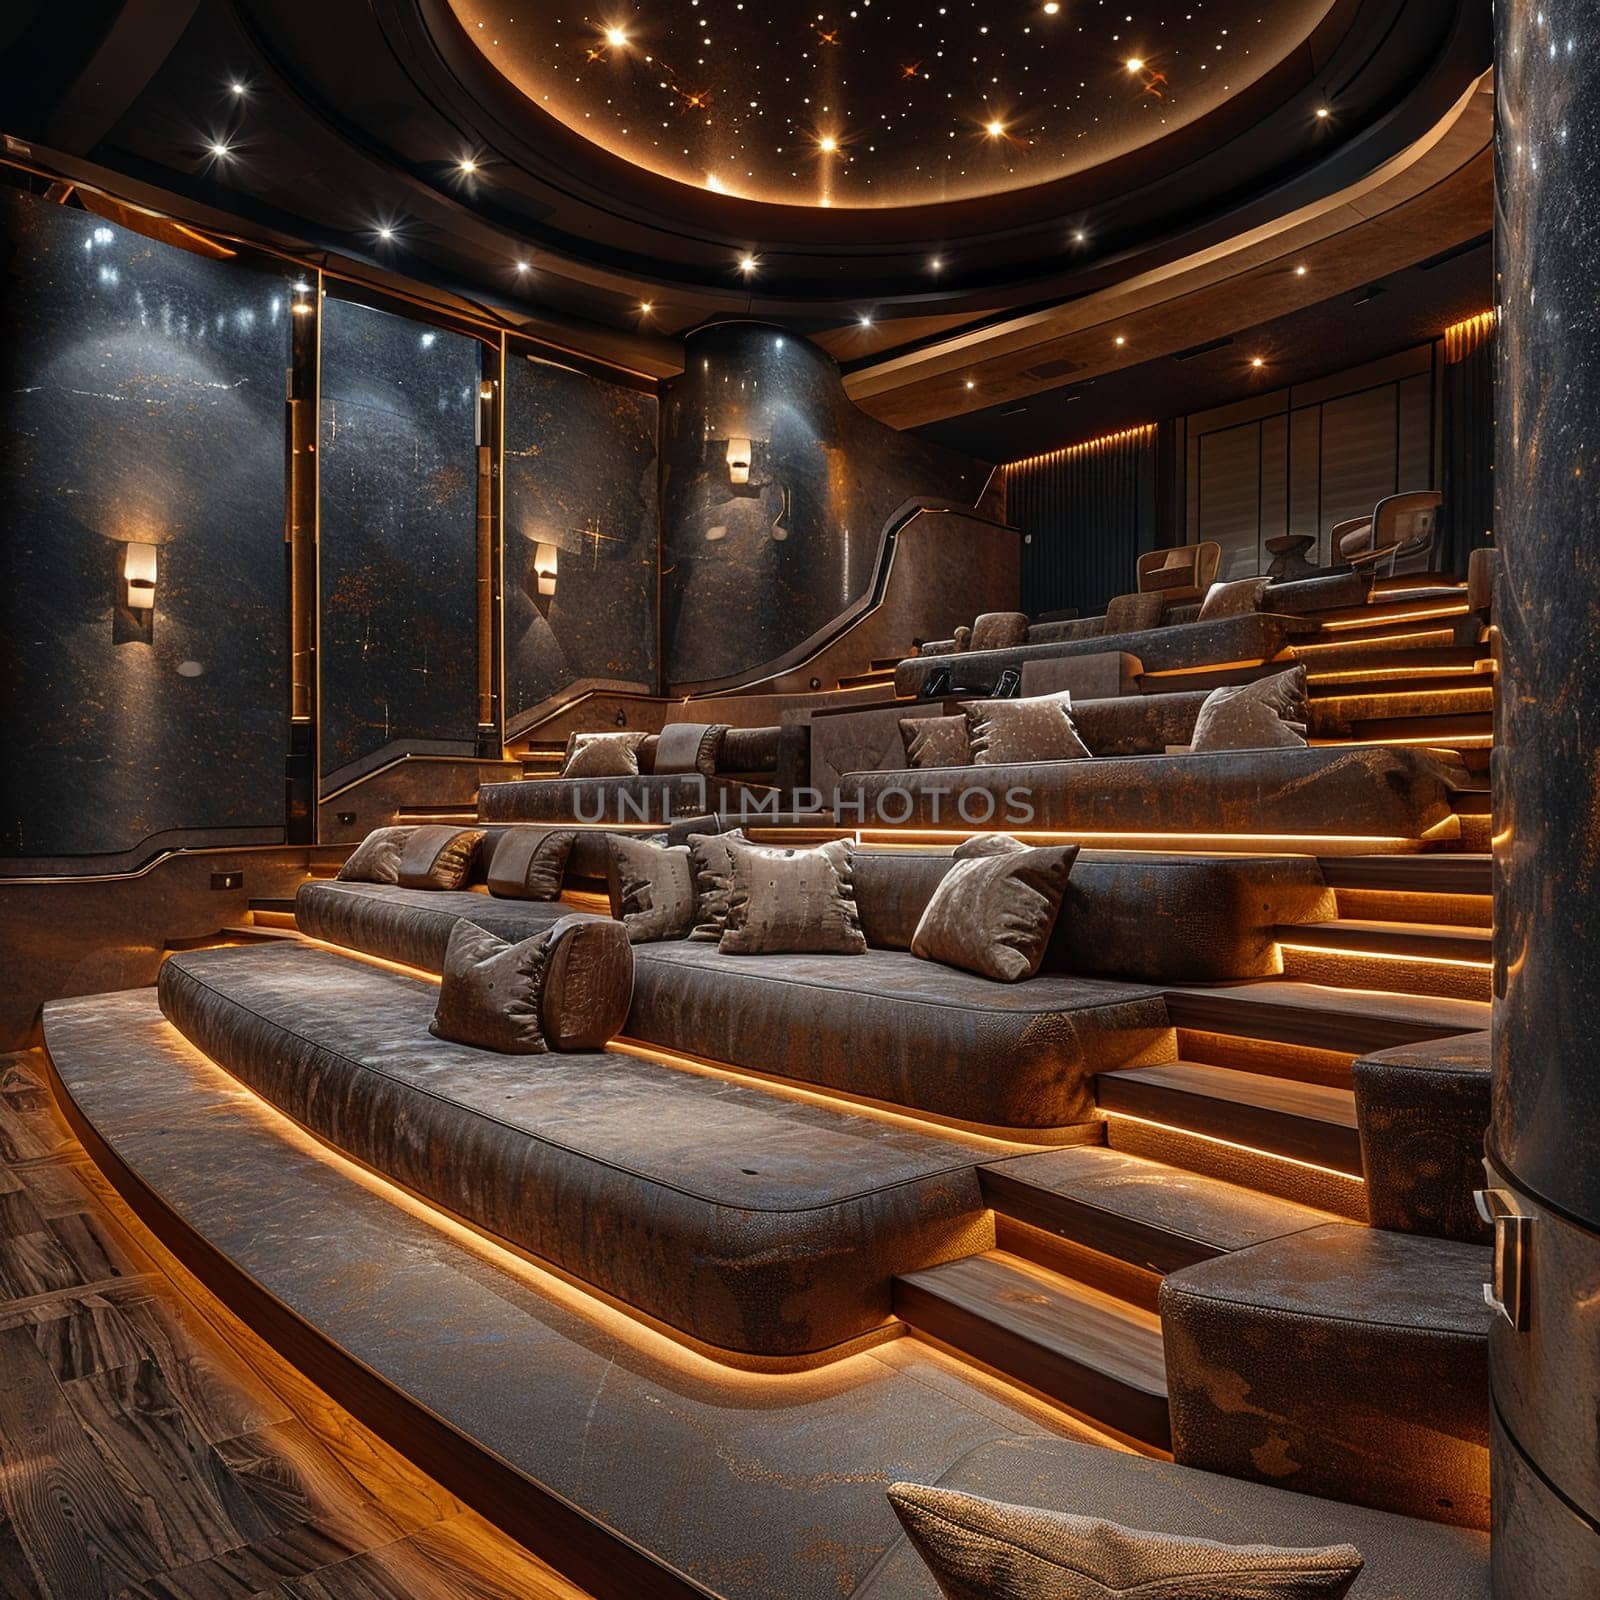 Luxurious home theater with plush seating and state-of-the-art sound system8K